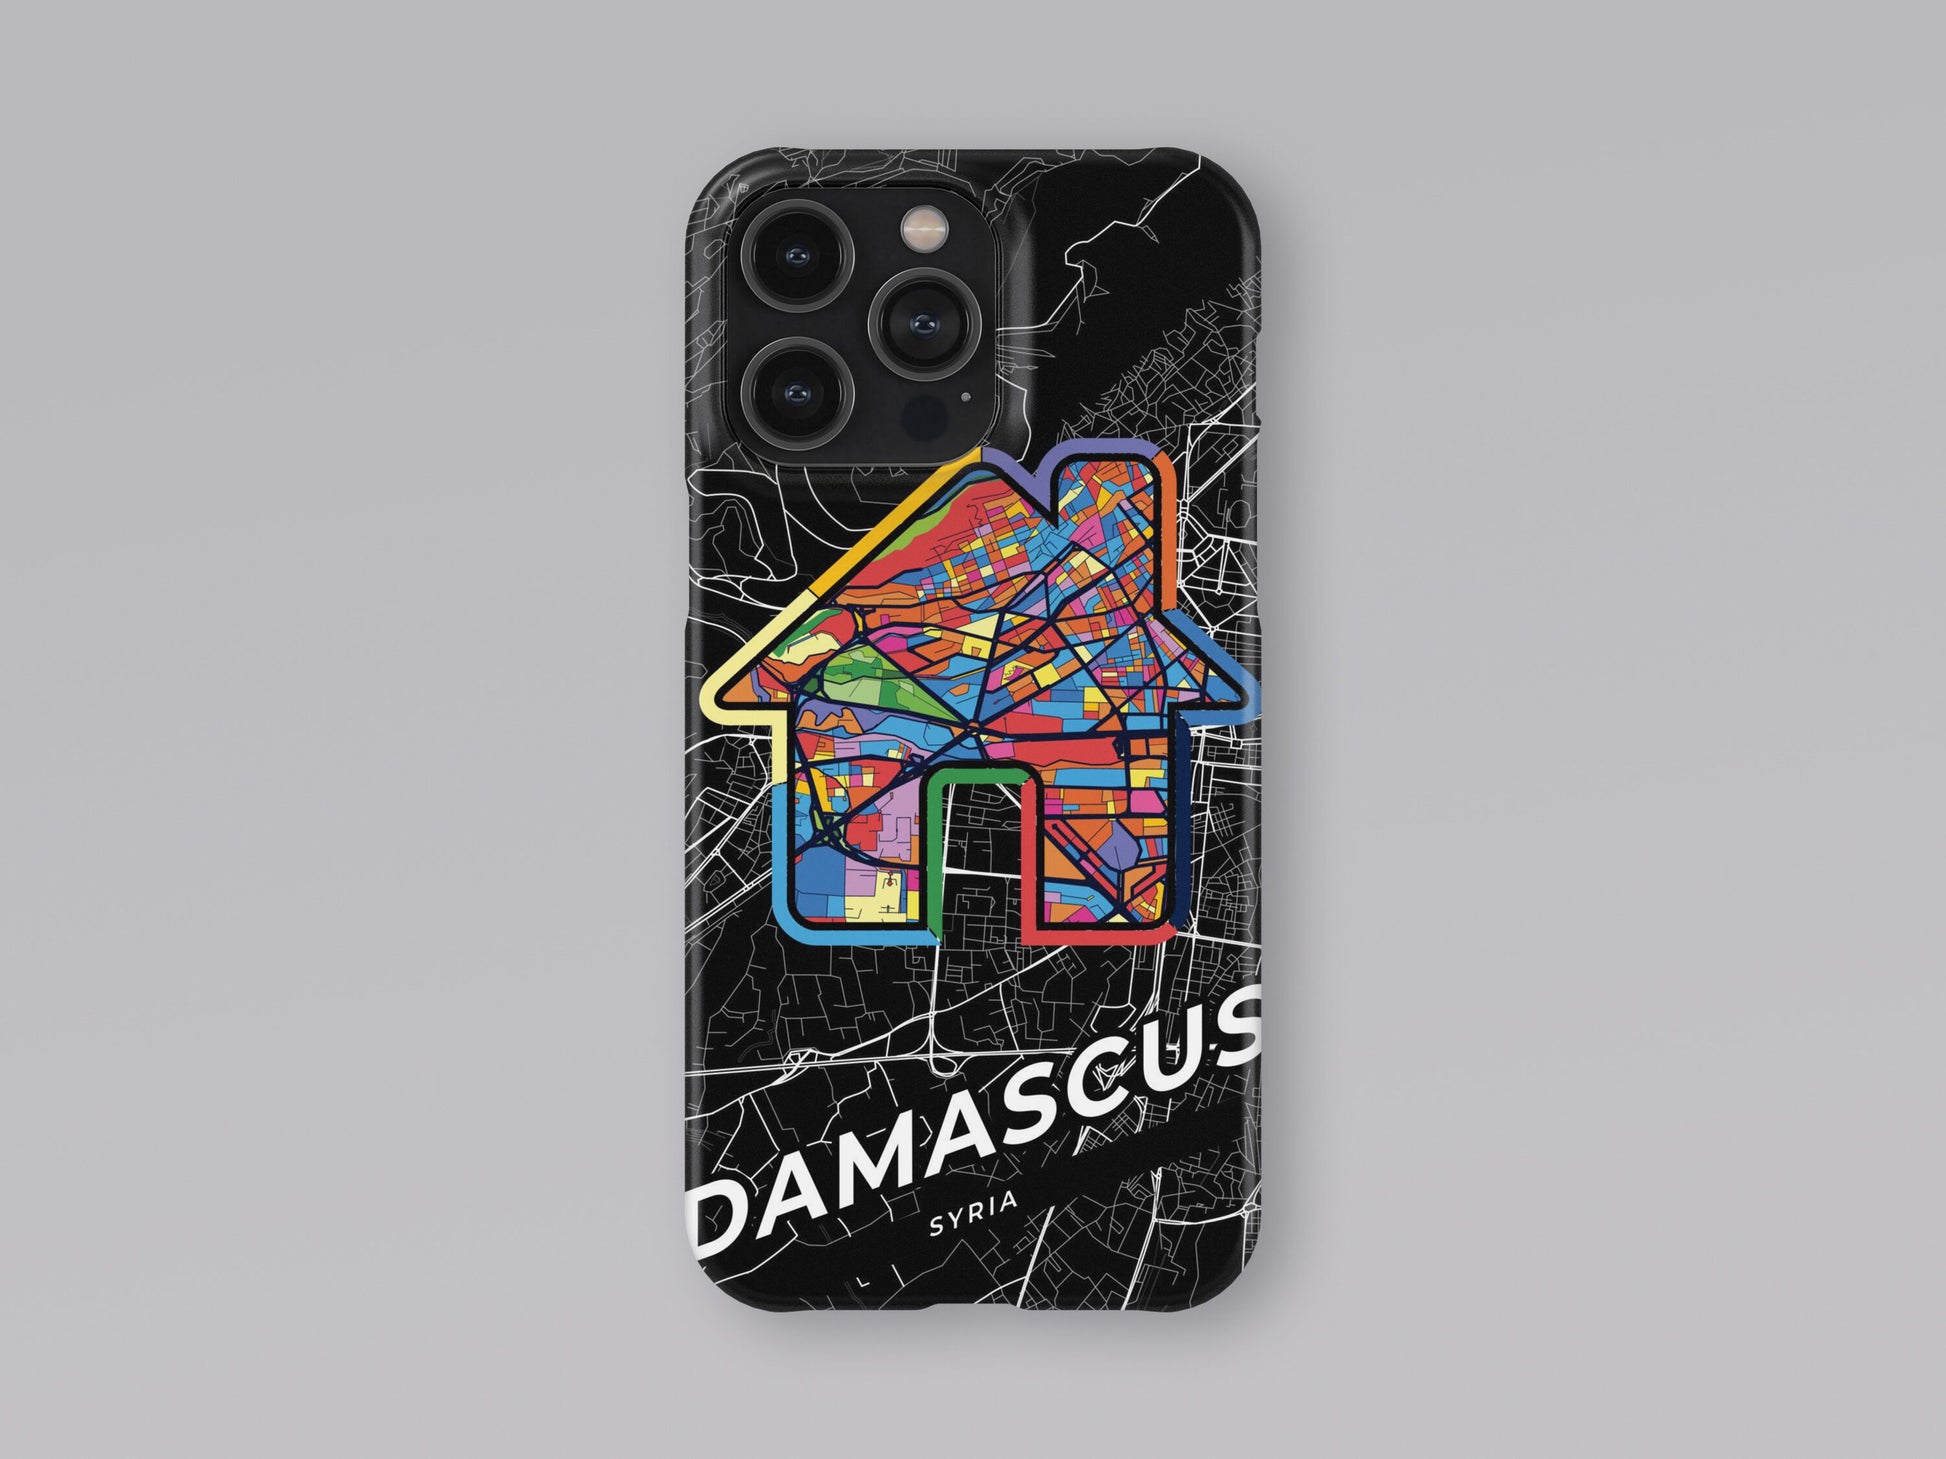 Damascus Syria slim phone case with colorful icon. Birthday, wedding or housewarming gift. Couple match cases. 3